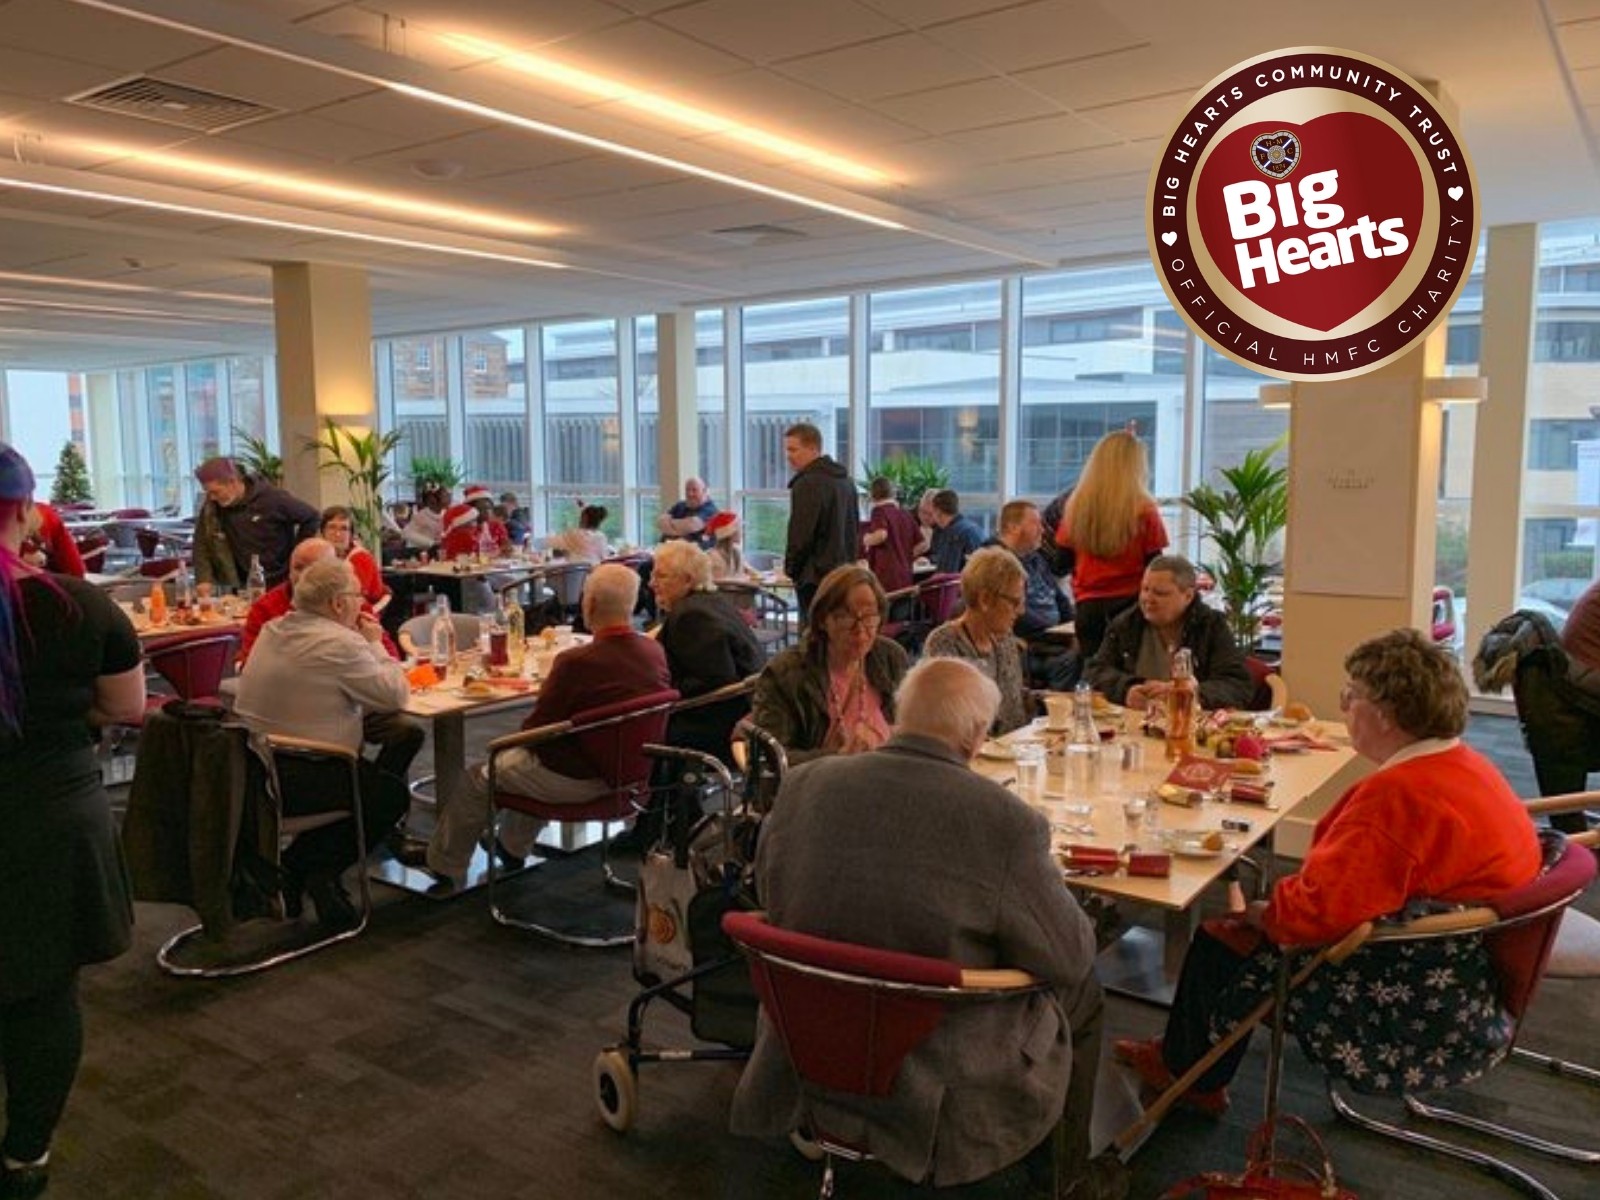  » Big Hearts to host 3rd Christmas Day Lunch at Tynecastle Park